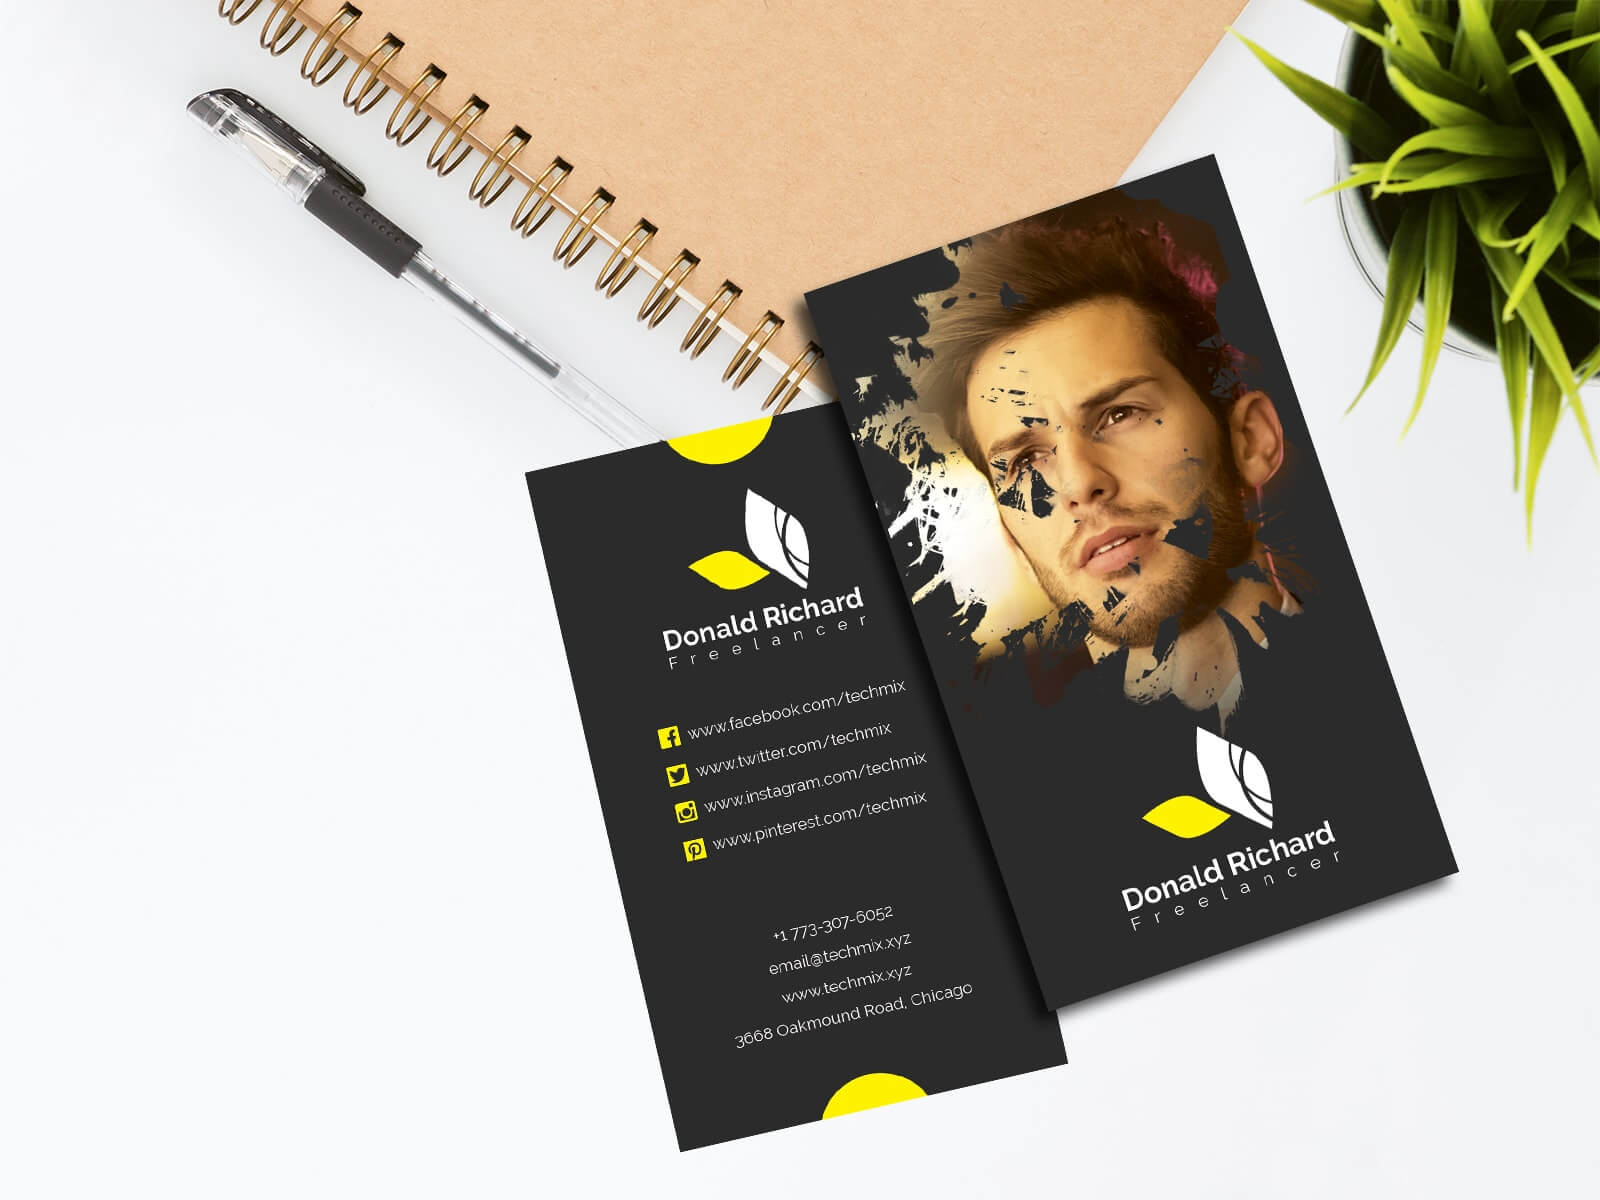 5 Best Freelancer Business Cards 2020 | Techmix With Regard To Freelance Business Card Template